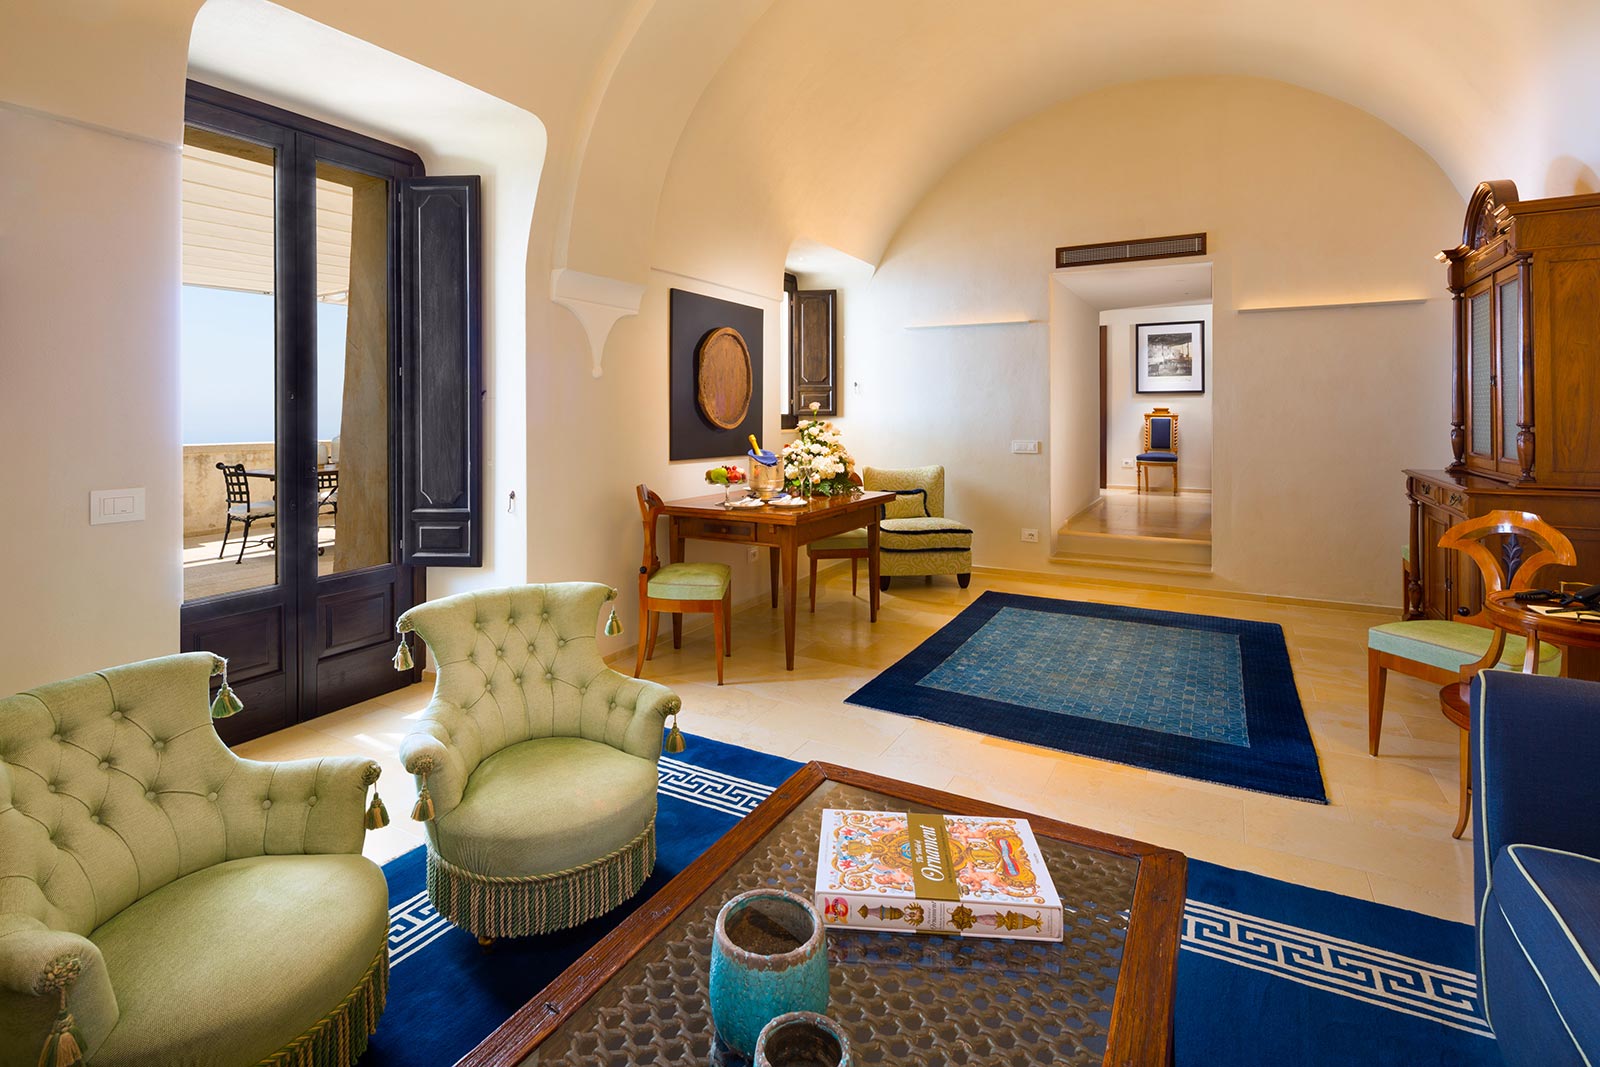 12 Amazing and Luxurious Hotel Suites You Deserve To Enjoy On Your Next Big Vacation
